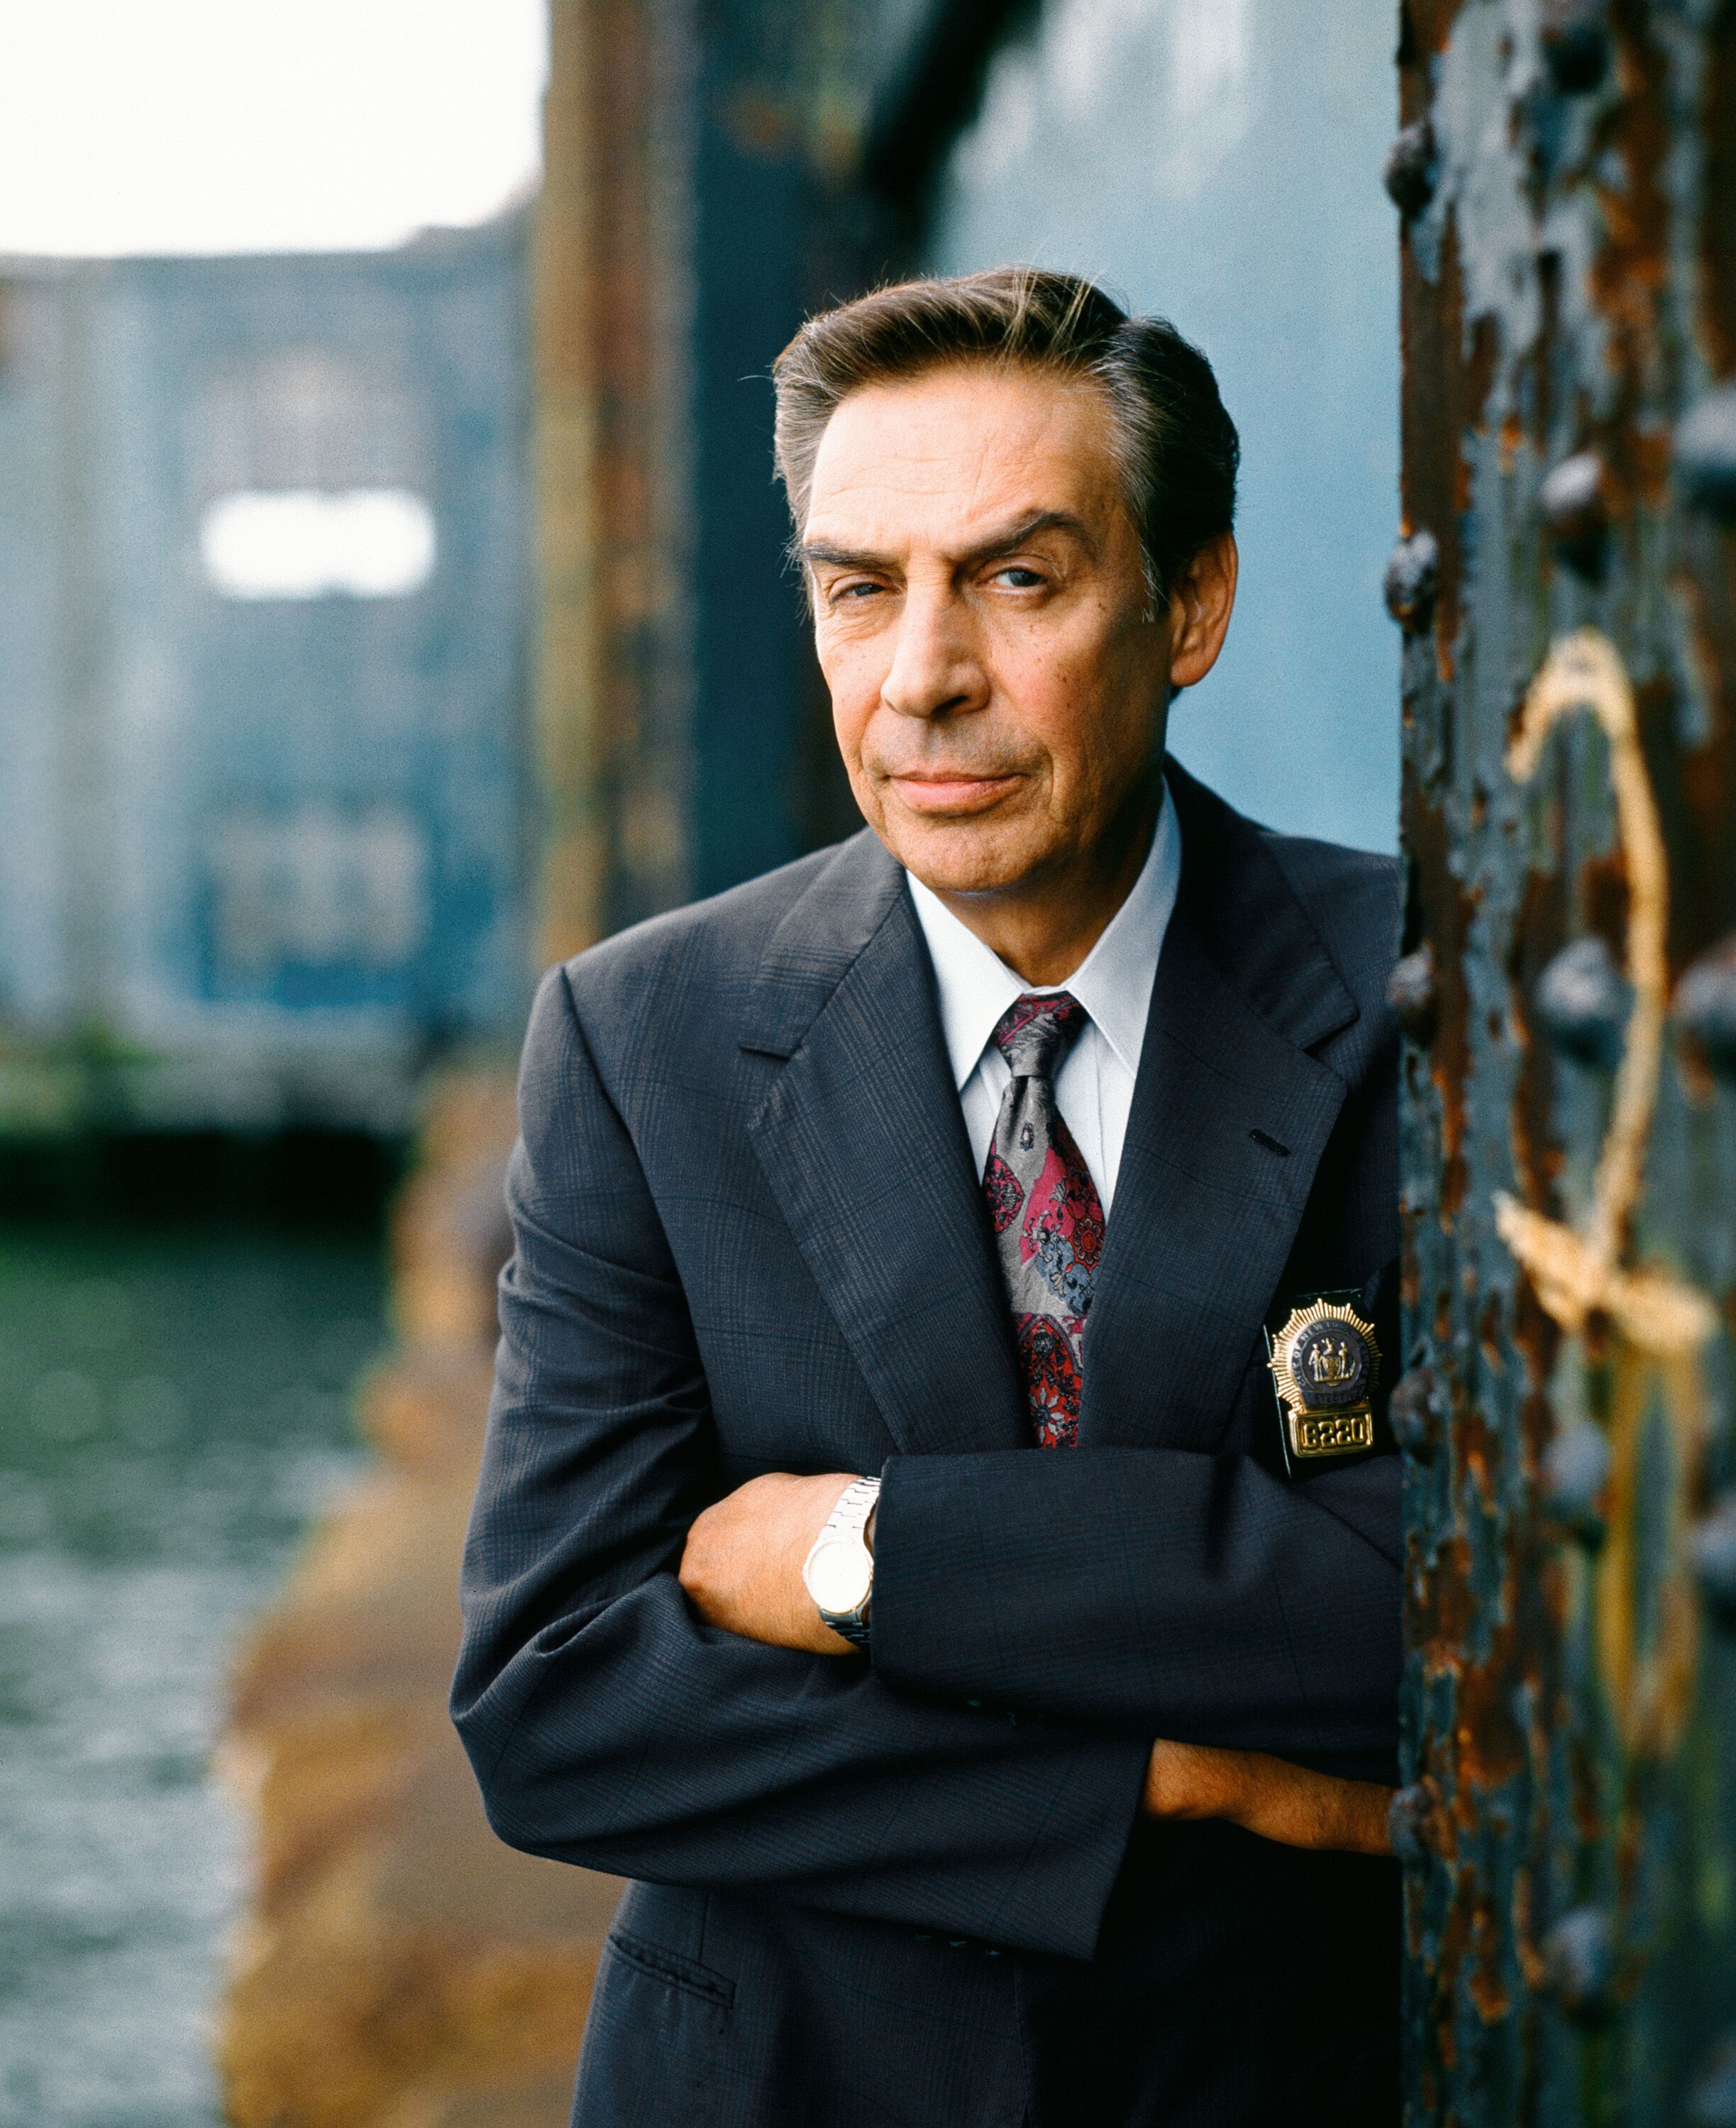 LAW & ORDER -- Season 7 -- Pictured: Jerry Orbach as Detective Lennie Briscoe | Photo: Getty Images